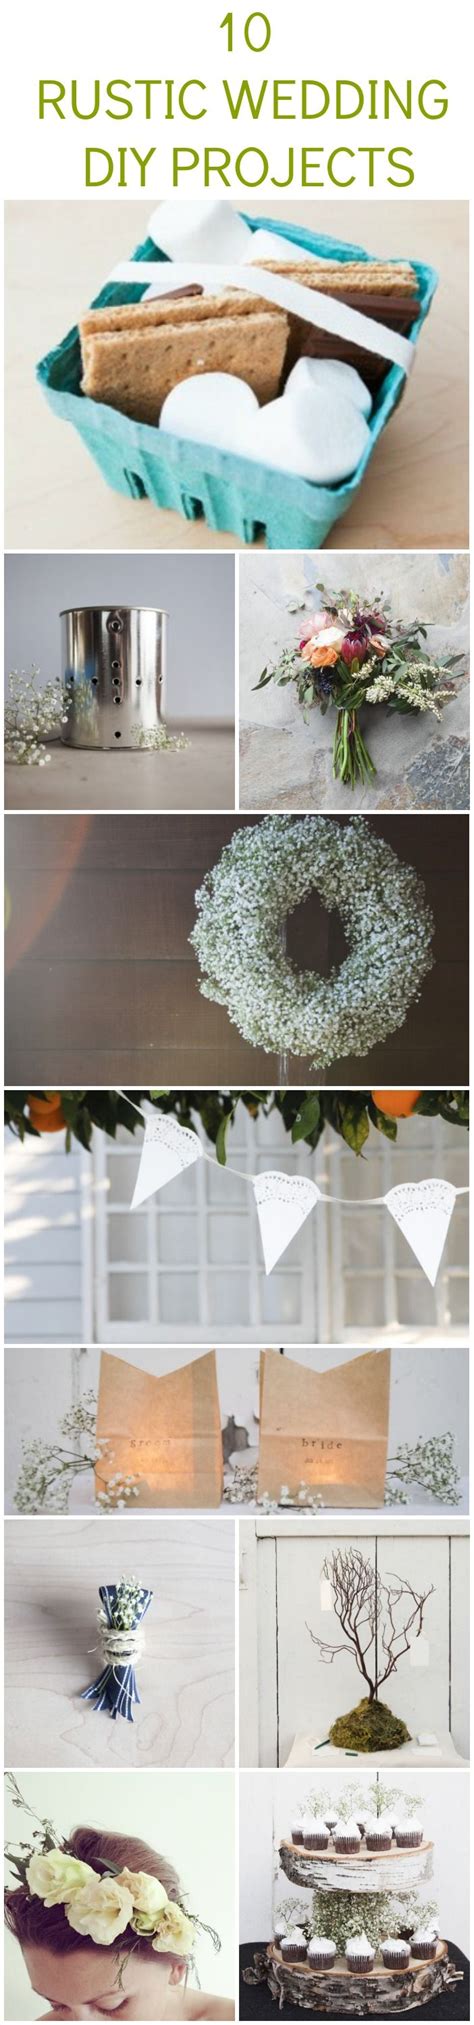 Hide Your Cheap Side With These Fancy Looking Diy Projects Cheapside Diy Wedding Rustic